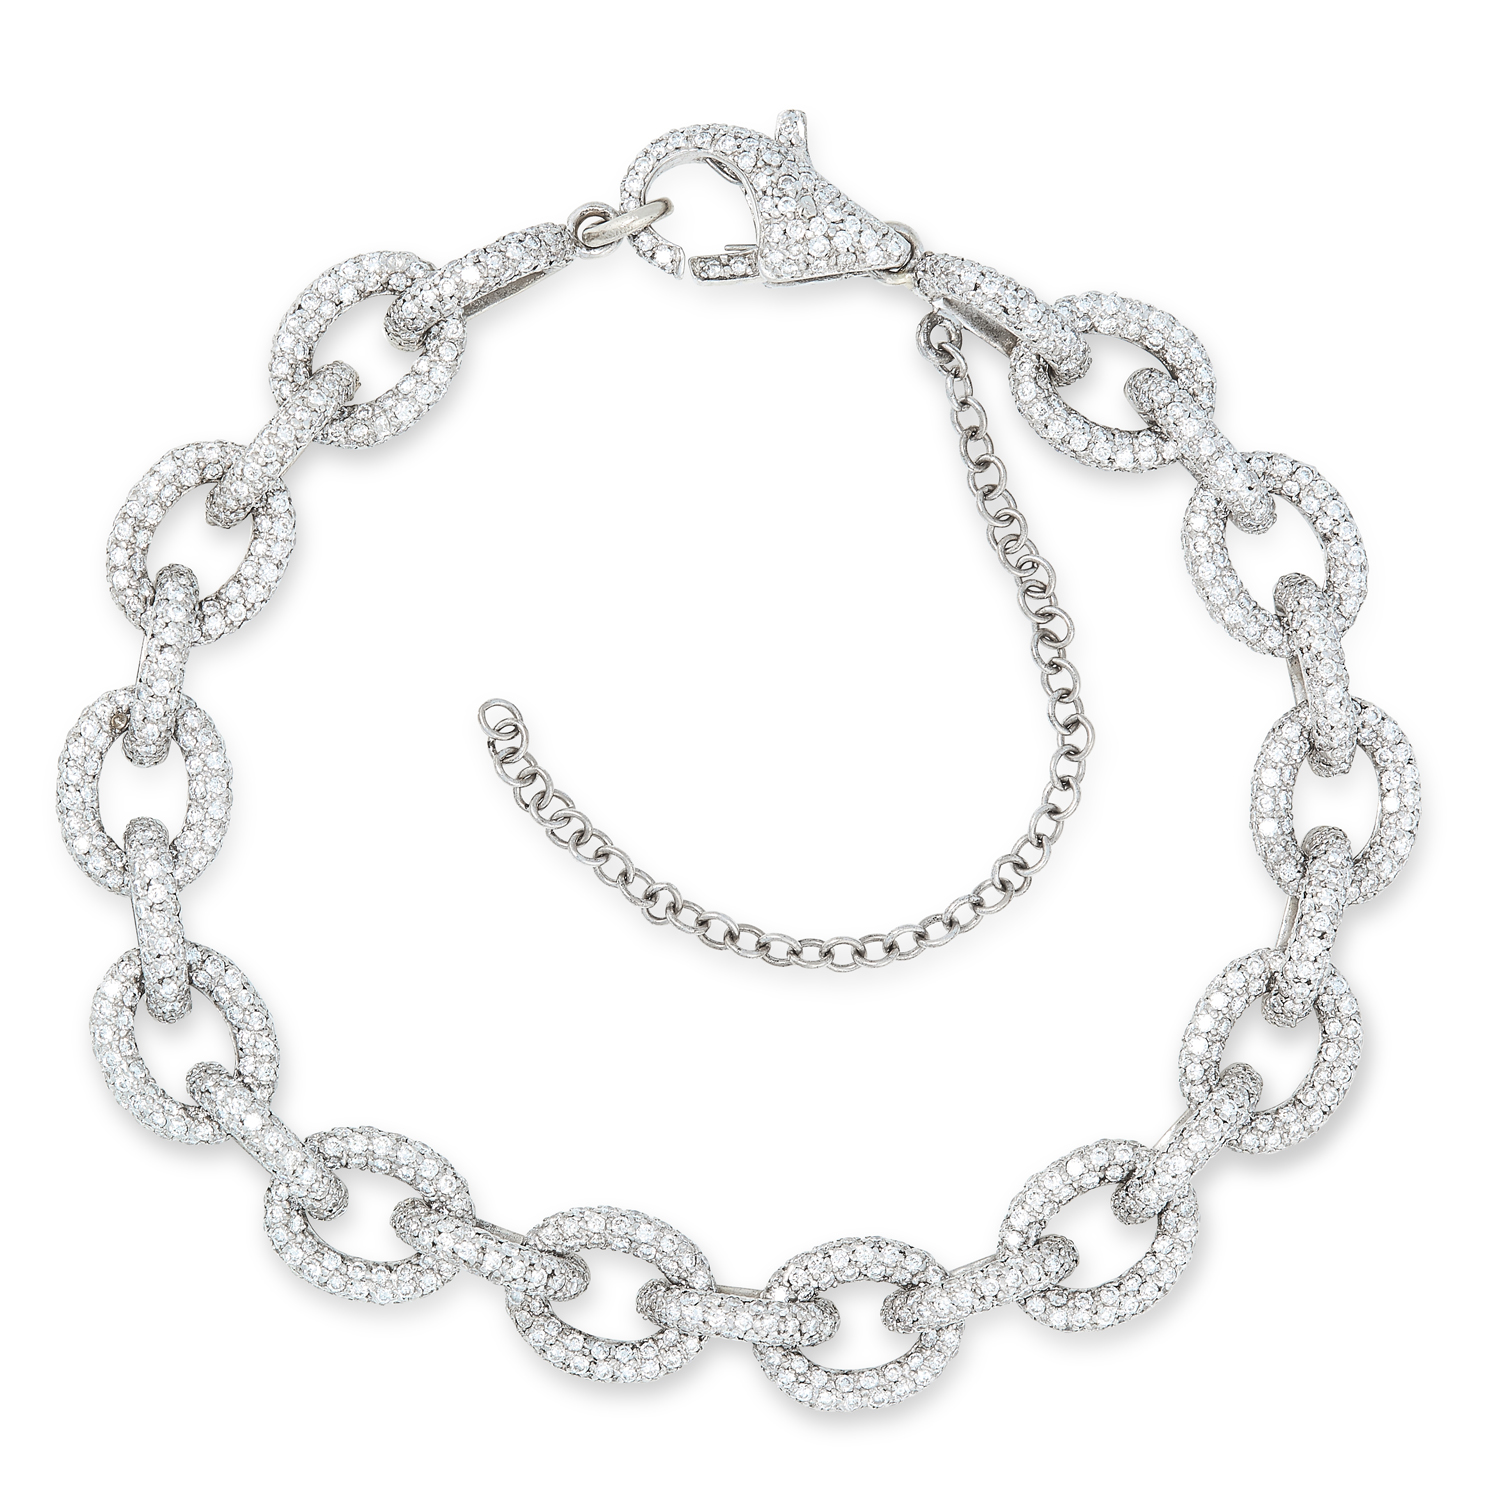 A DIAMOND FANCY LINK BRACELET comprising of oval fancy links, pave set with round brilliant cut